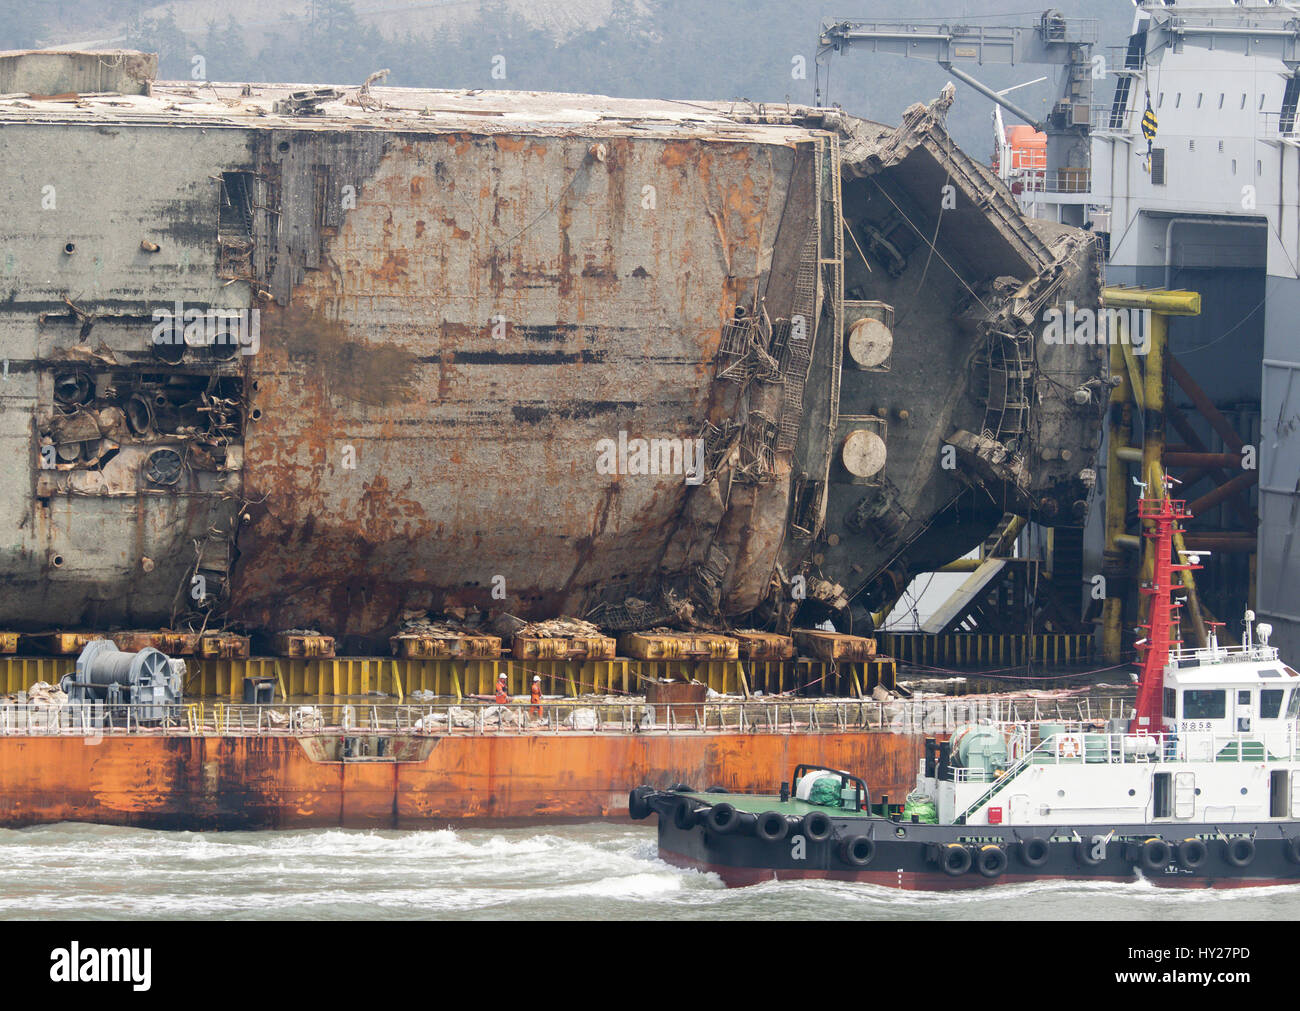 Mokpo, South Korea. 31st March 2017. Semi-submersible ship Dockwise White Marlin carries Sewol Ferry to Mokpo New Port in Mokpo, about 311 km (193 miles) south of Seoul, South Korea. The Sewol Ferry sailed into the port on Friday, about three years after it sank off South Korea's southwestern coast near Jindo on April 16, 2014 during a journey from Incheon to Jeju. The Ferry was carrying 475 crew and passengers, mostly high school students on a school trip. Credit: Aflo Co. Ltd./Alamy Live News Stock Photo